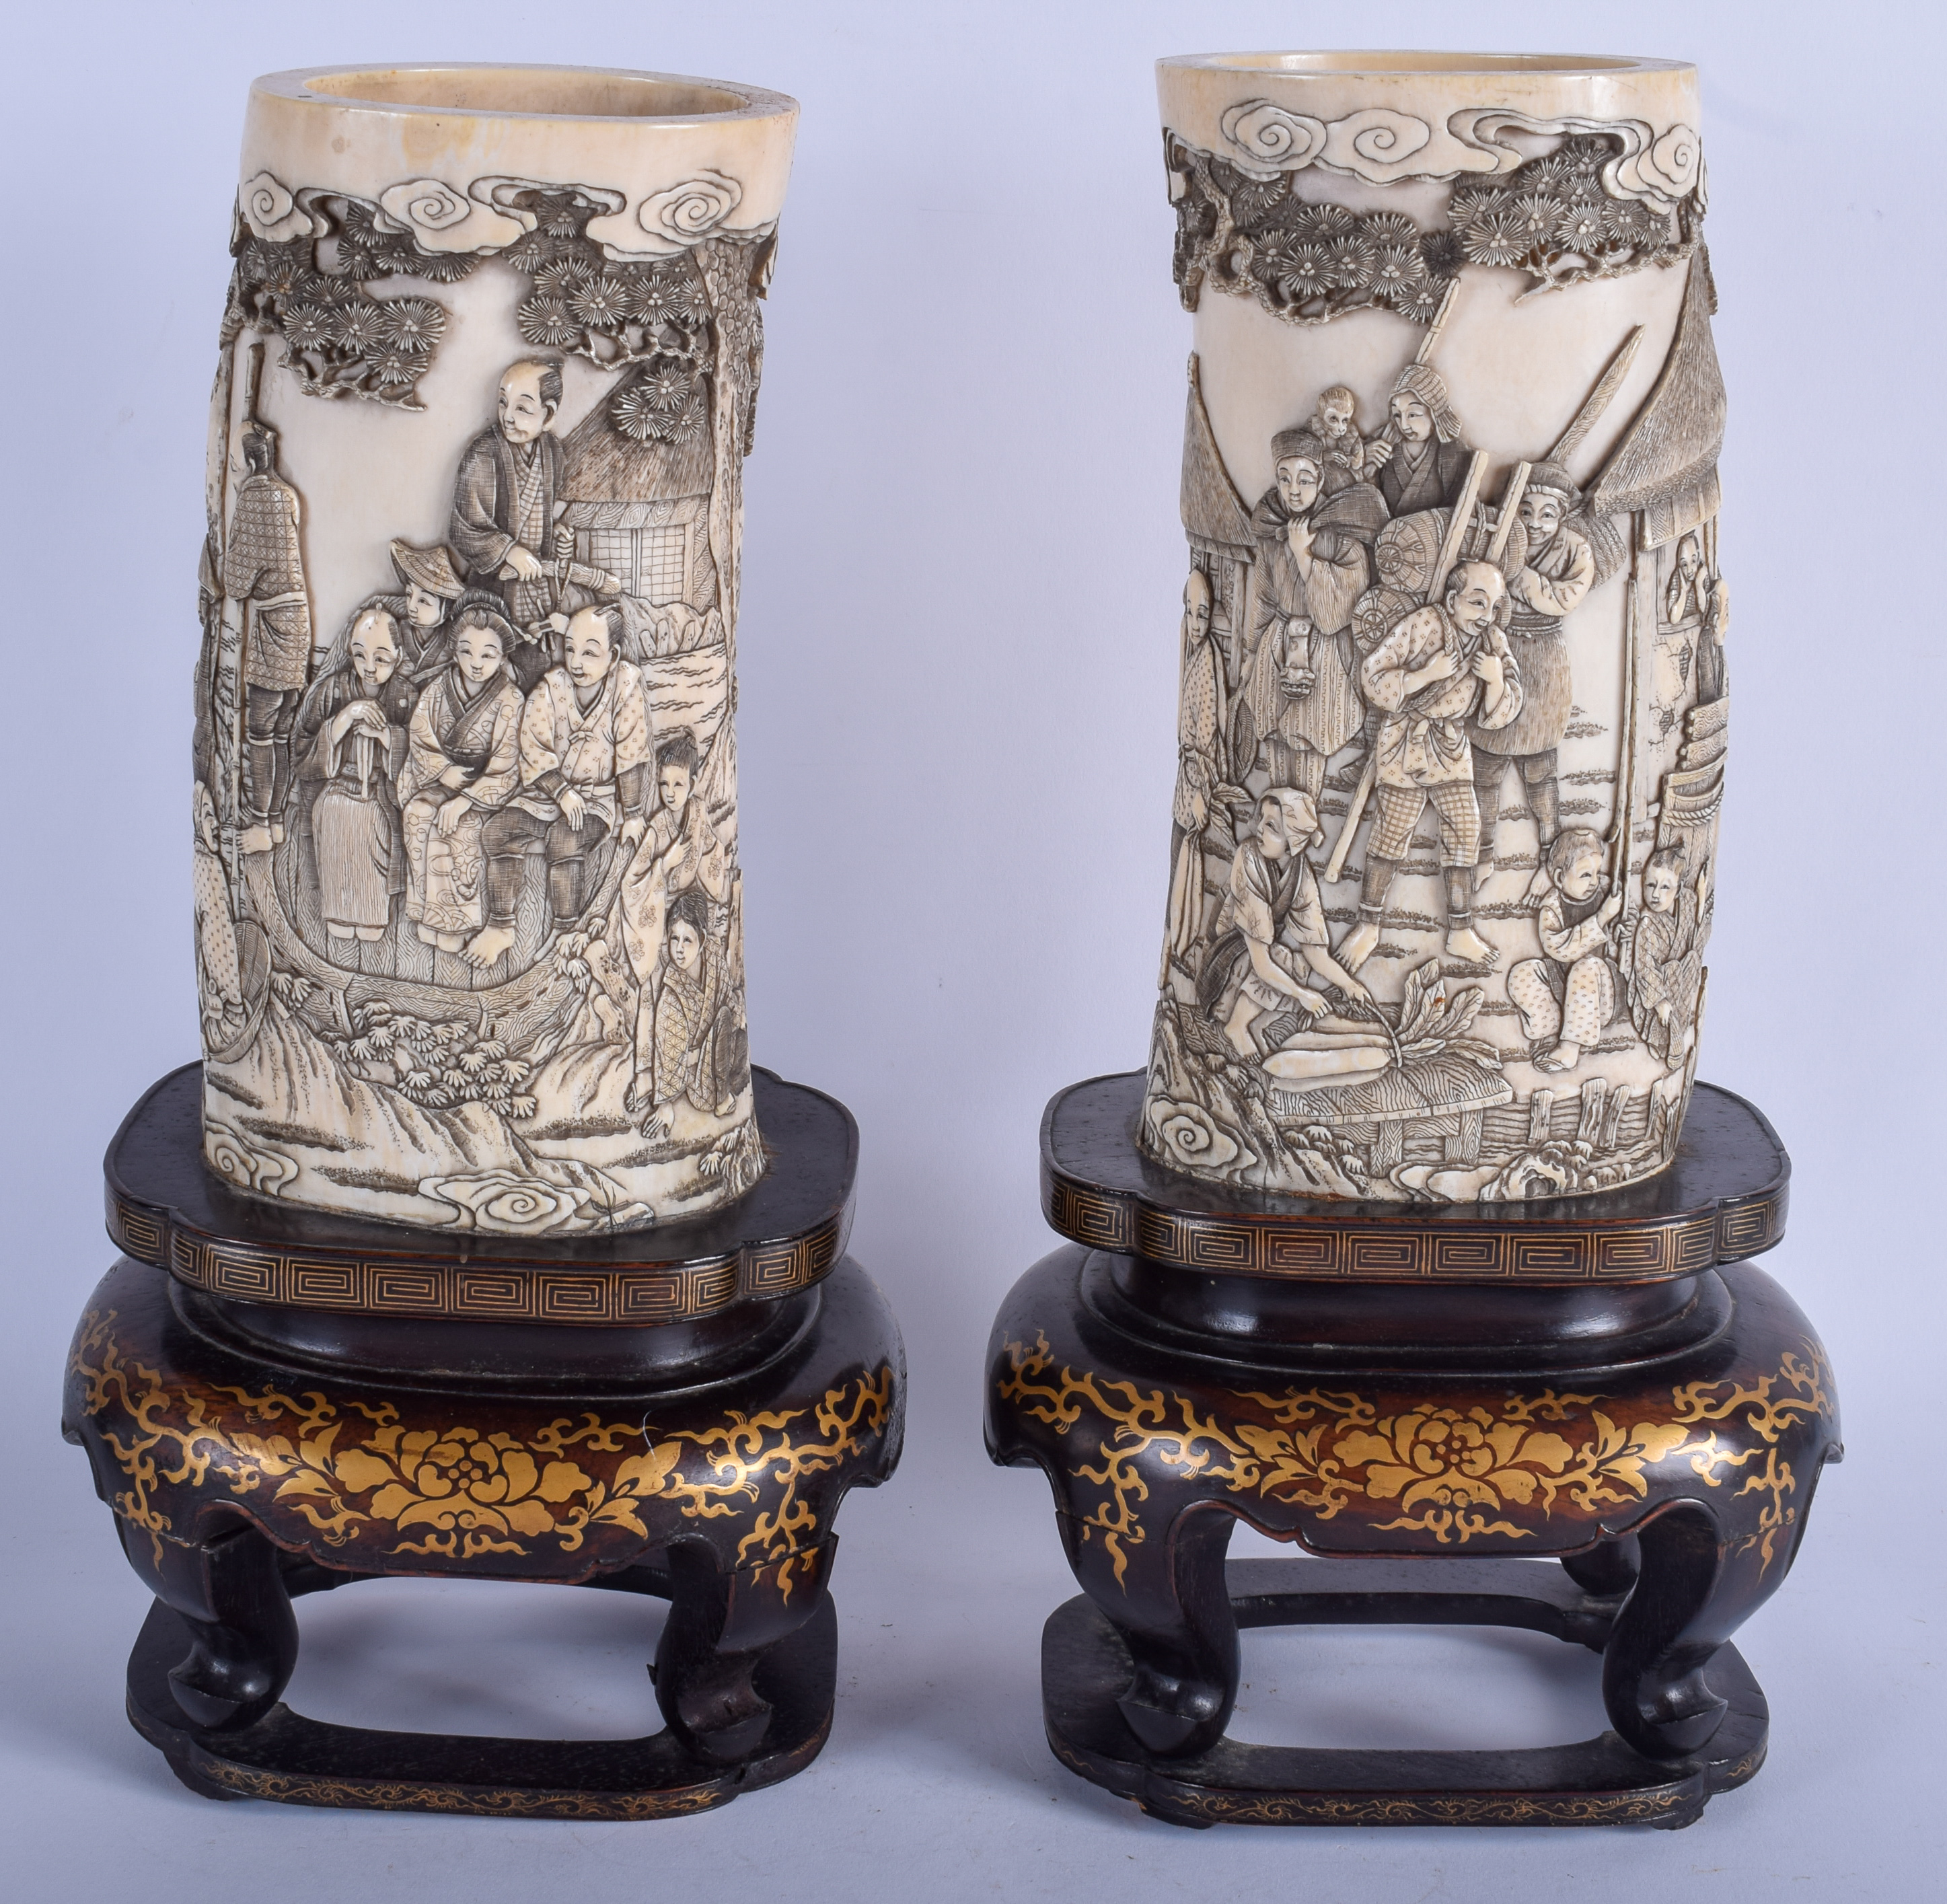 A LARGE PAIR OF 19TH CENTURY JAPANESE MEIJI PERIOD CARVED IVORY TUSK VASES upon lacquered bases. 37 - Bild 2 aus 5